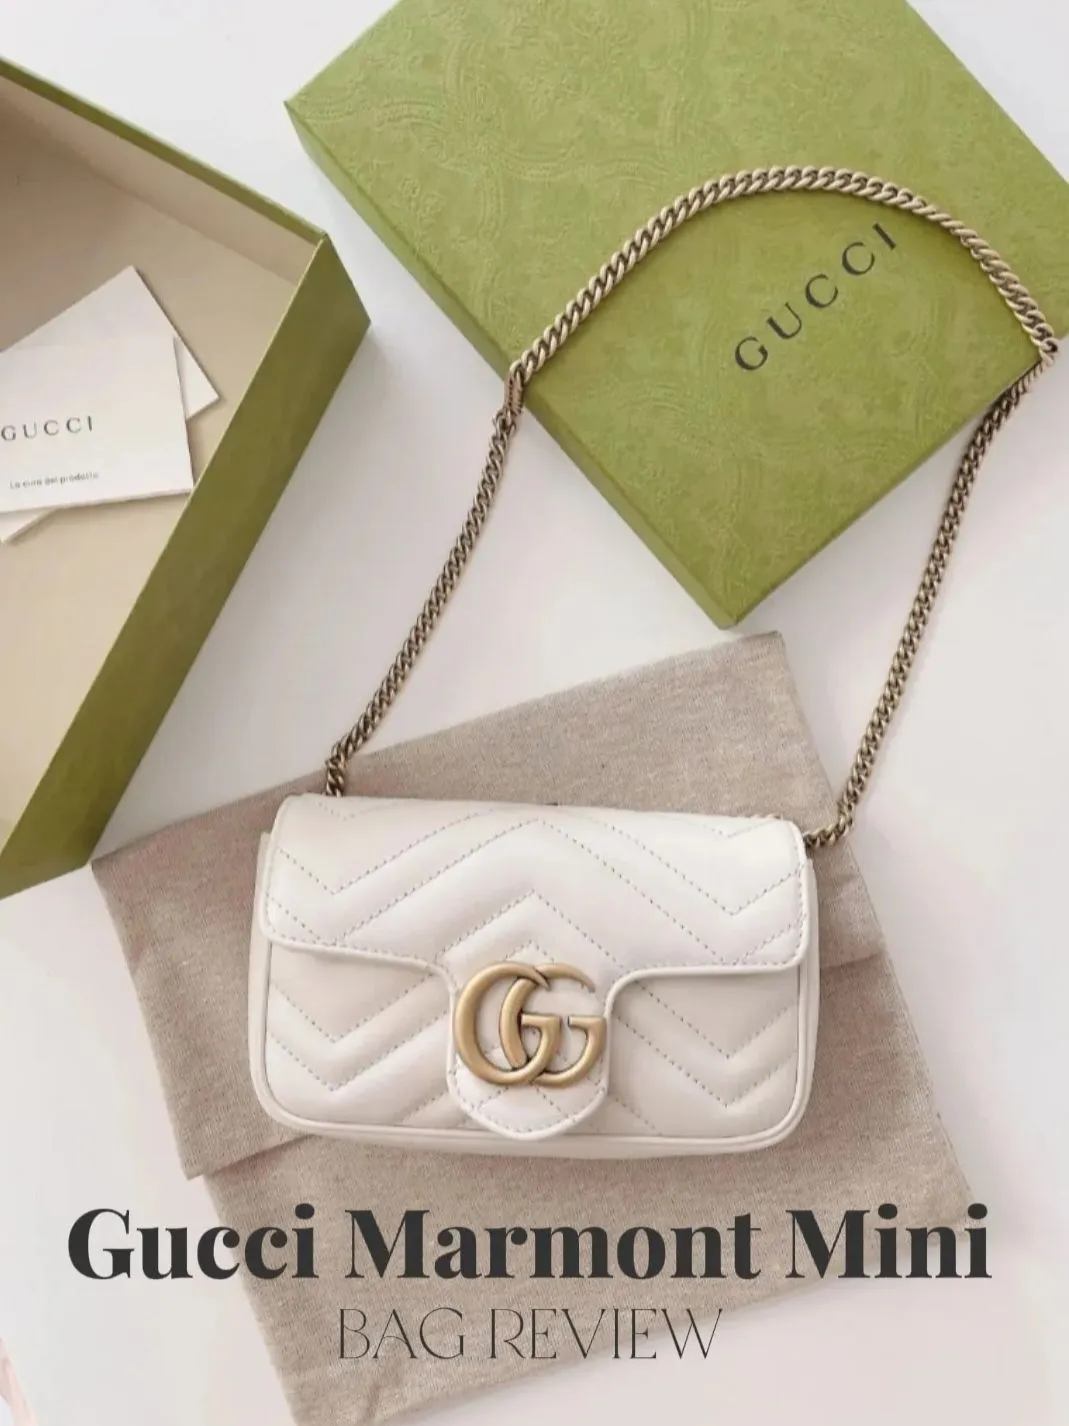 Gucci Marmont Super Mini Review: pros, cons, what fits, ways to